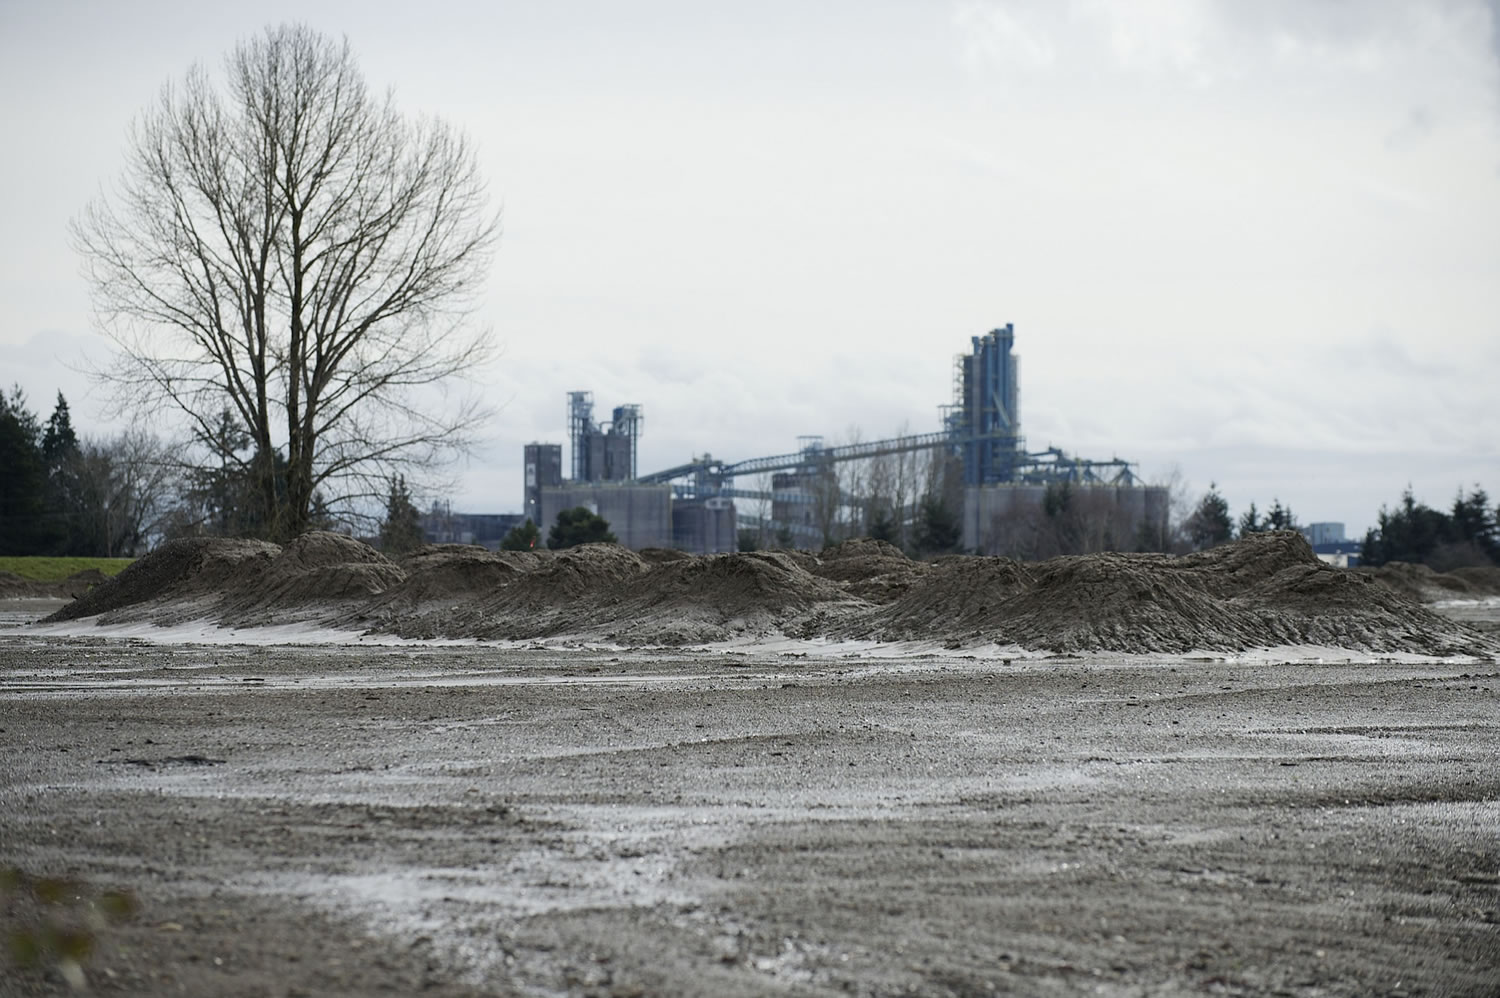 Vancouver-based Sunlight Supply is proposing a manfacturing facility and office on this site in the Port of Vancouver's Centennial Industrial Park.